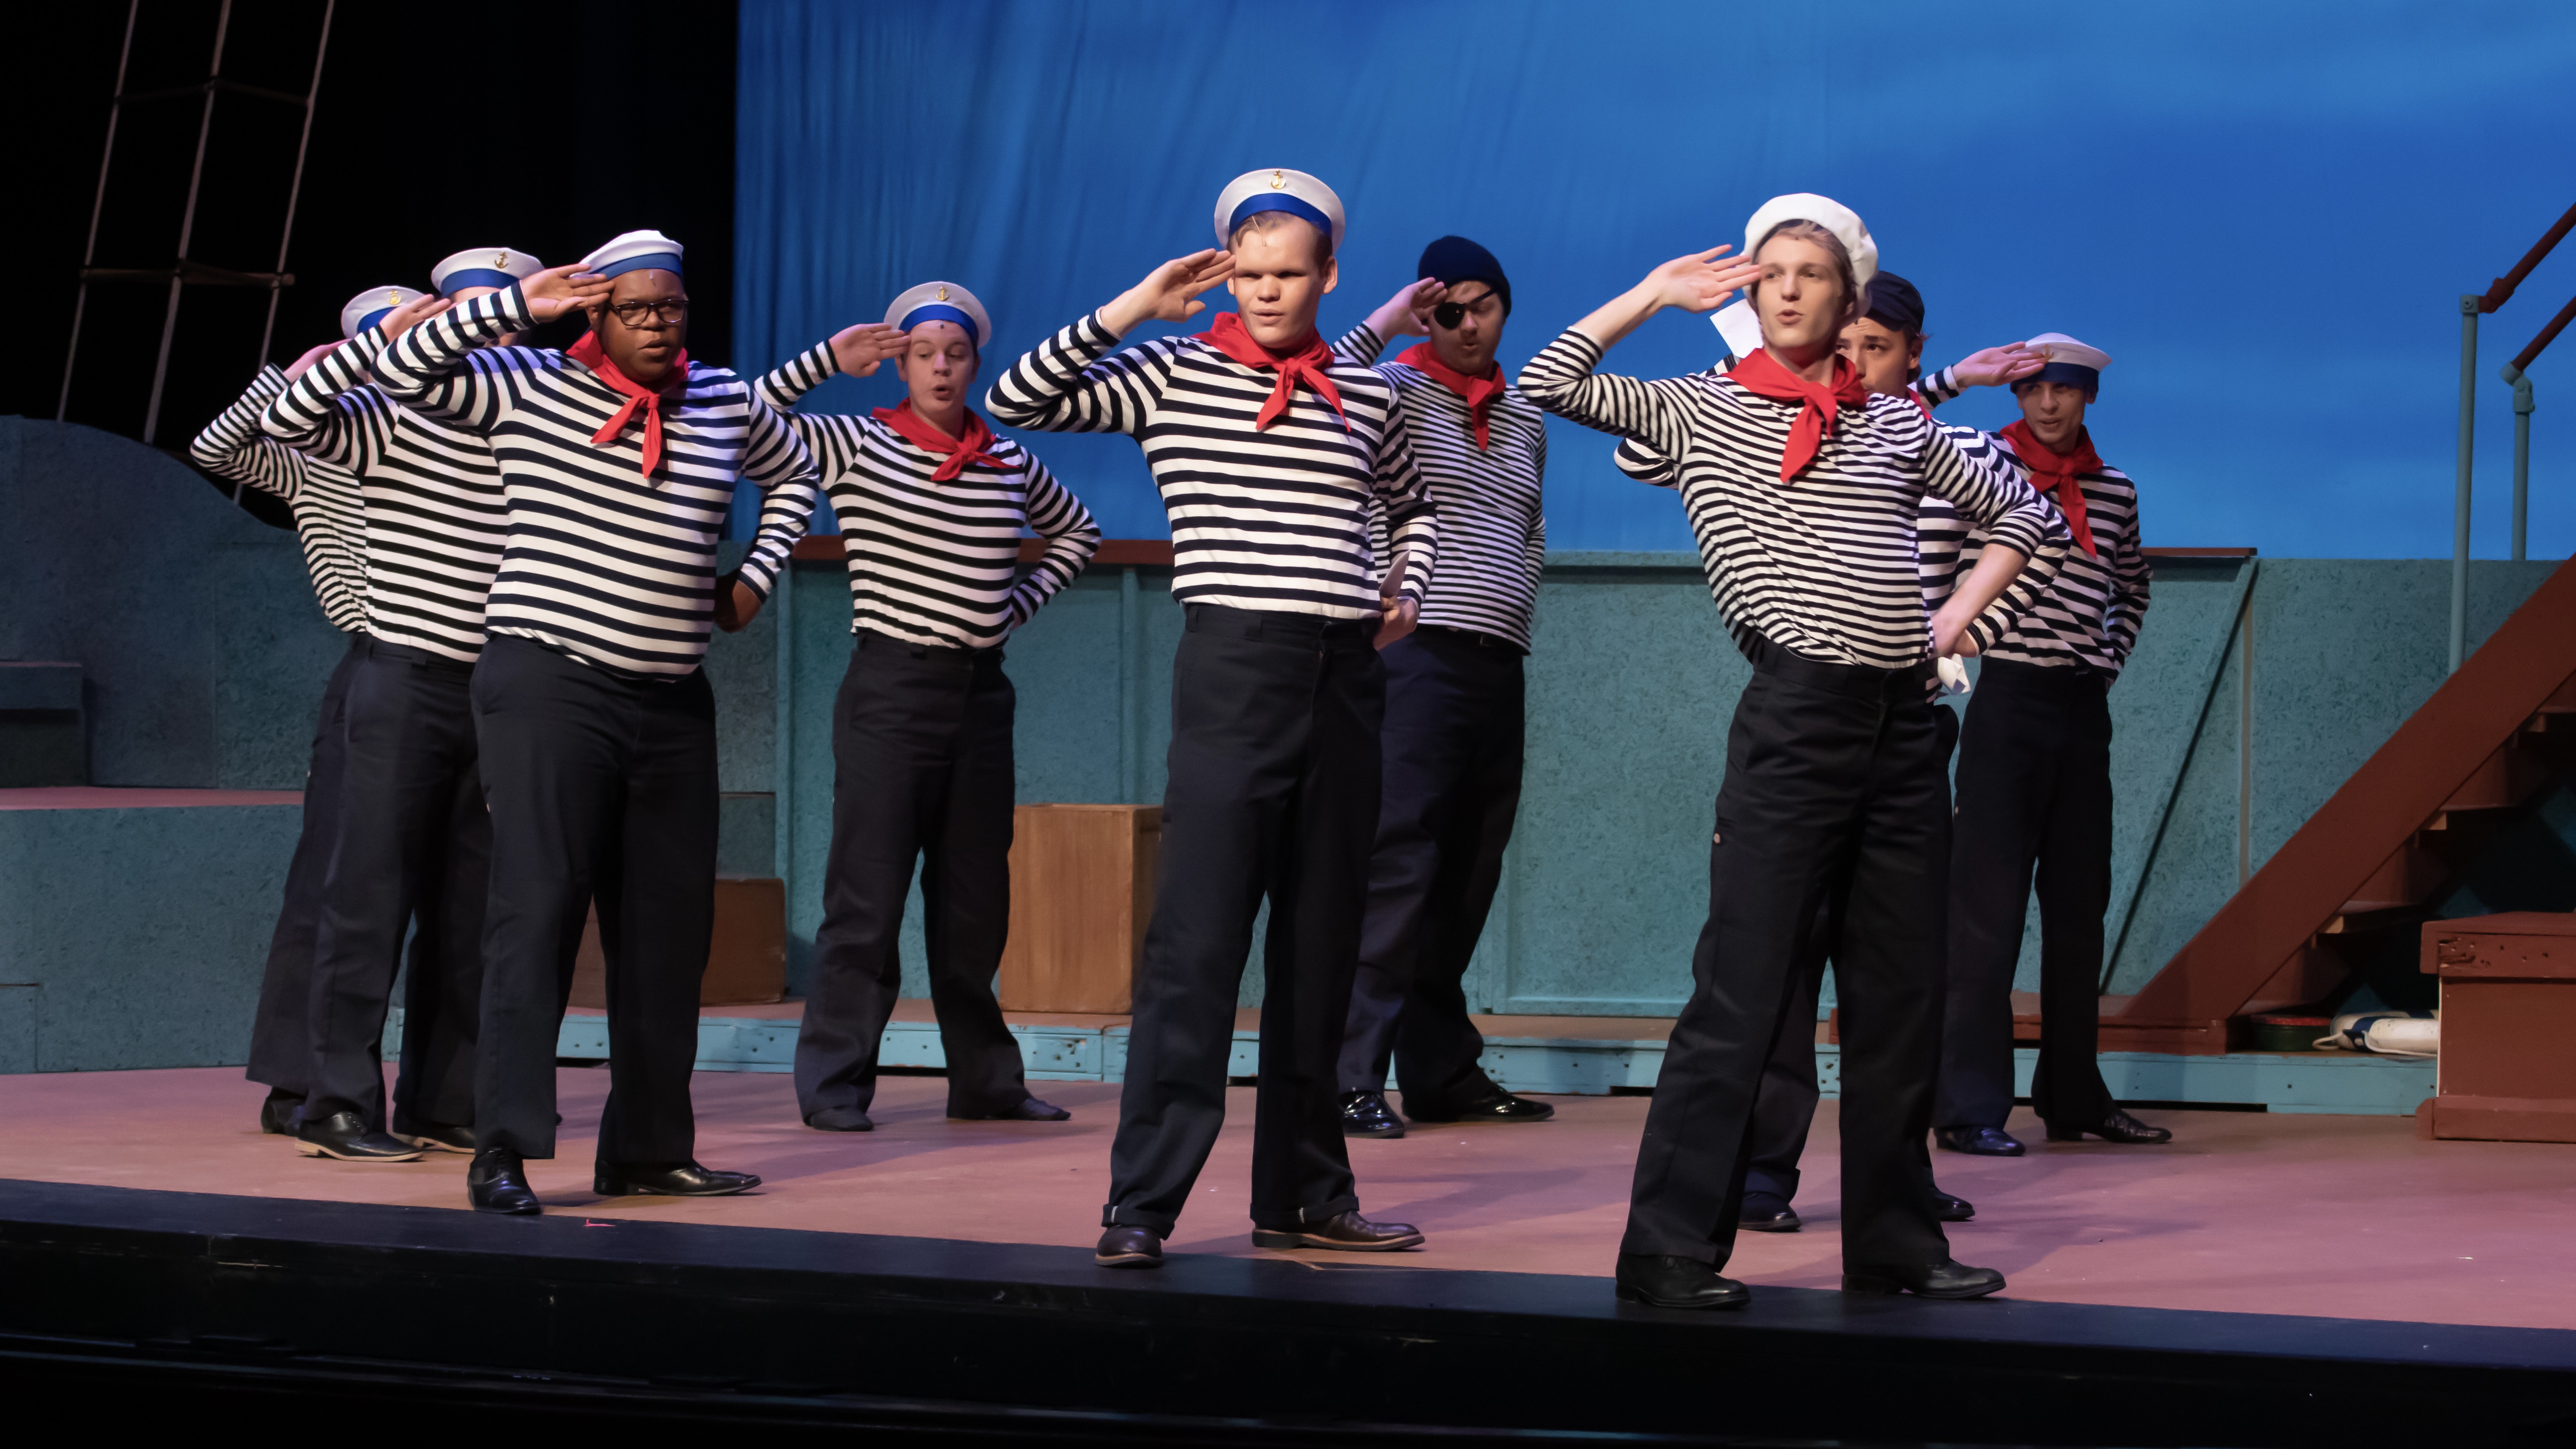 Ouachita Baptist University students performing a scene from "H.M.S. Pinafore"